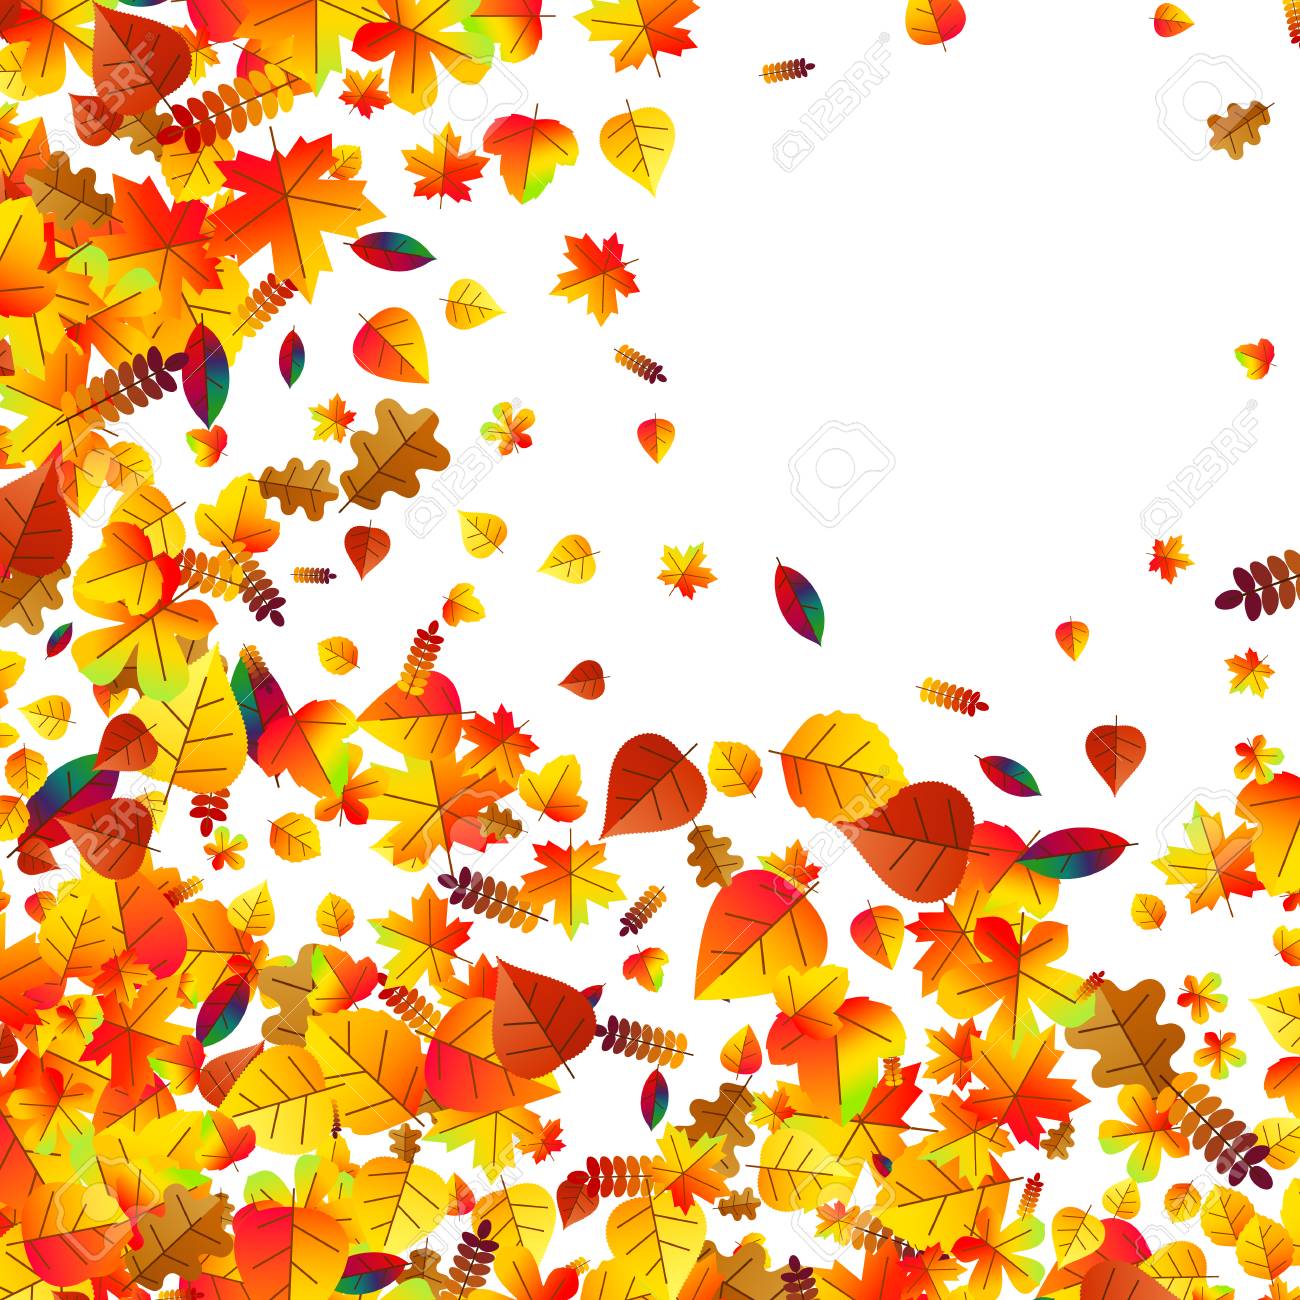 Autumn Leaves Scattered Background With Oak Maple And Rowan